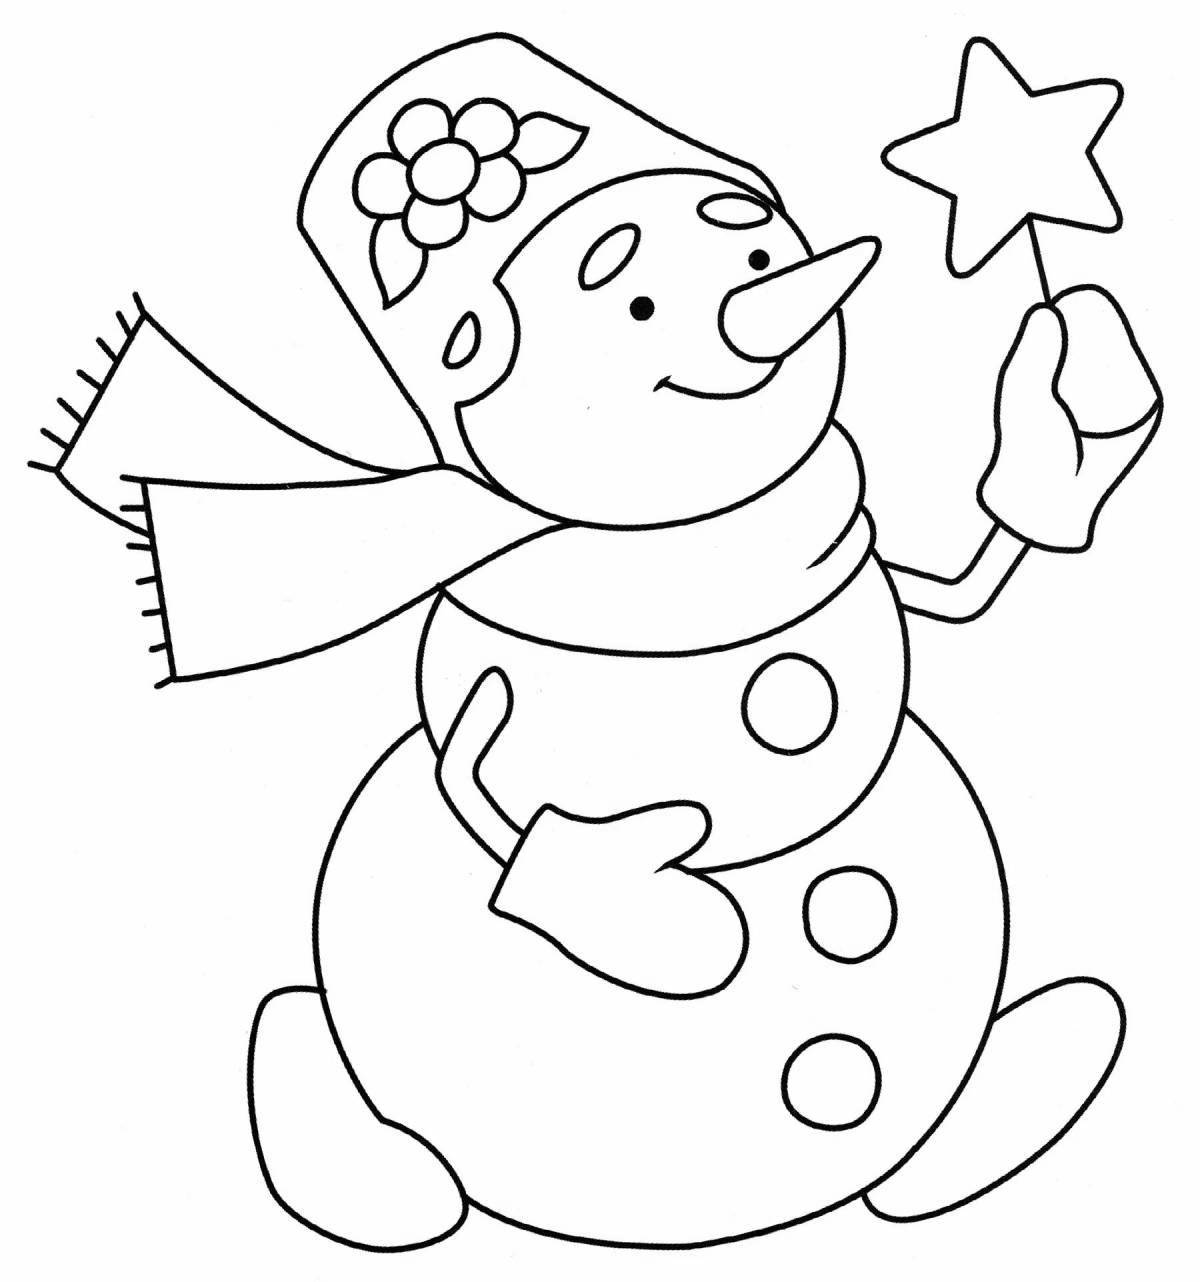 Great snowman coloring book in color